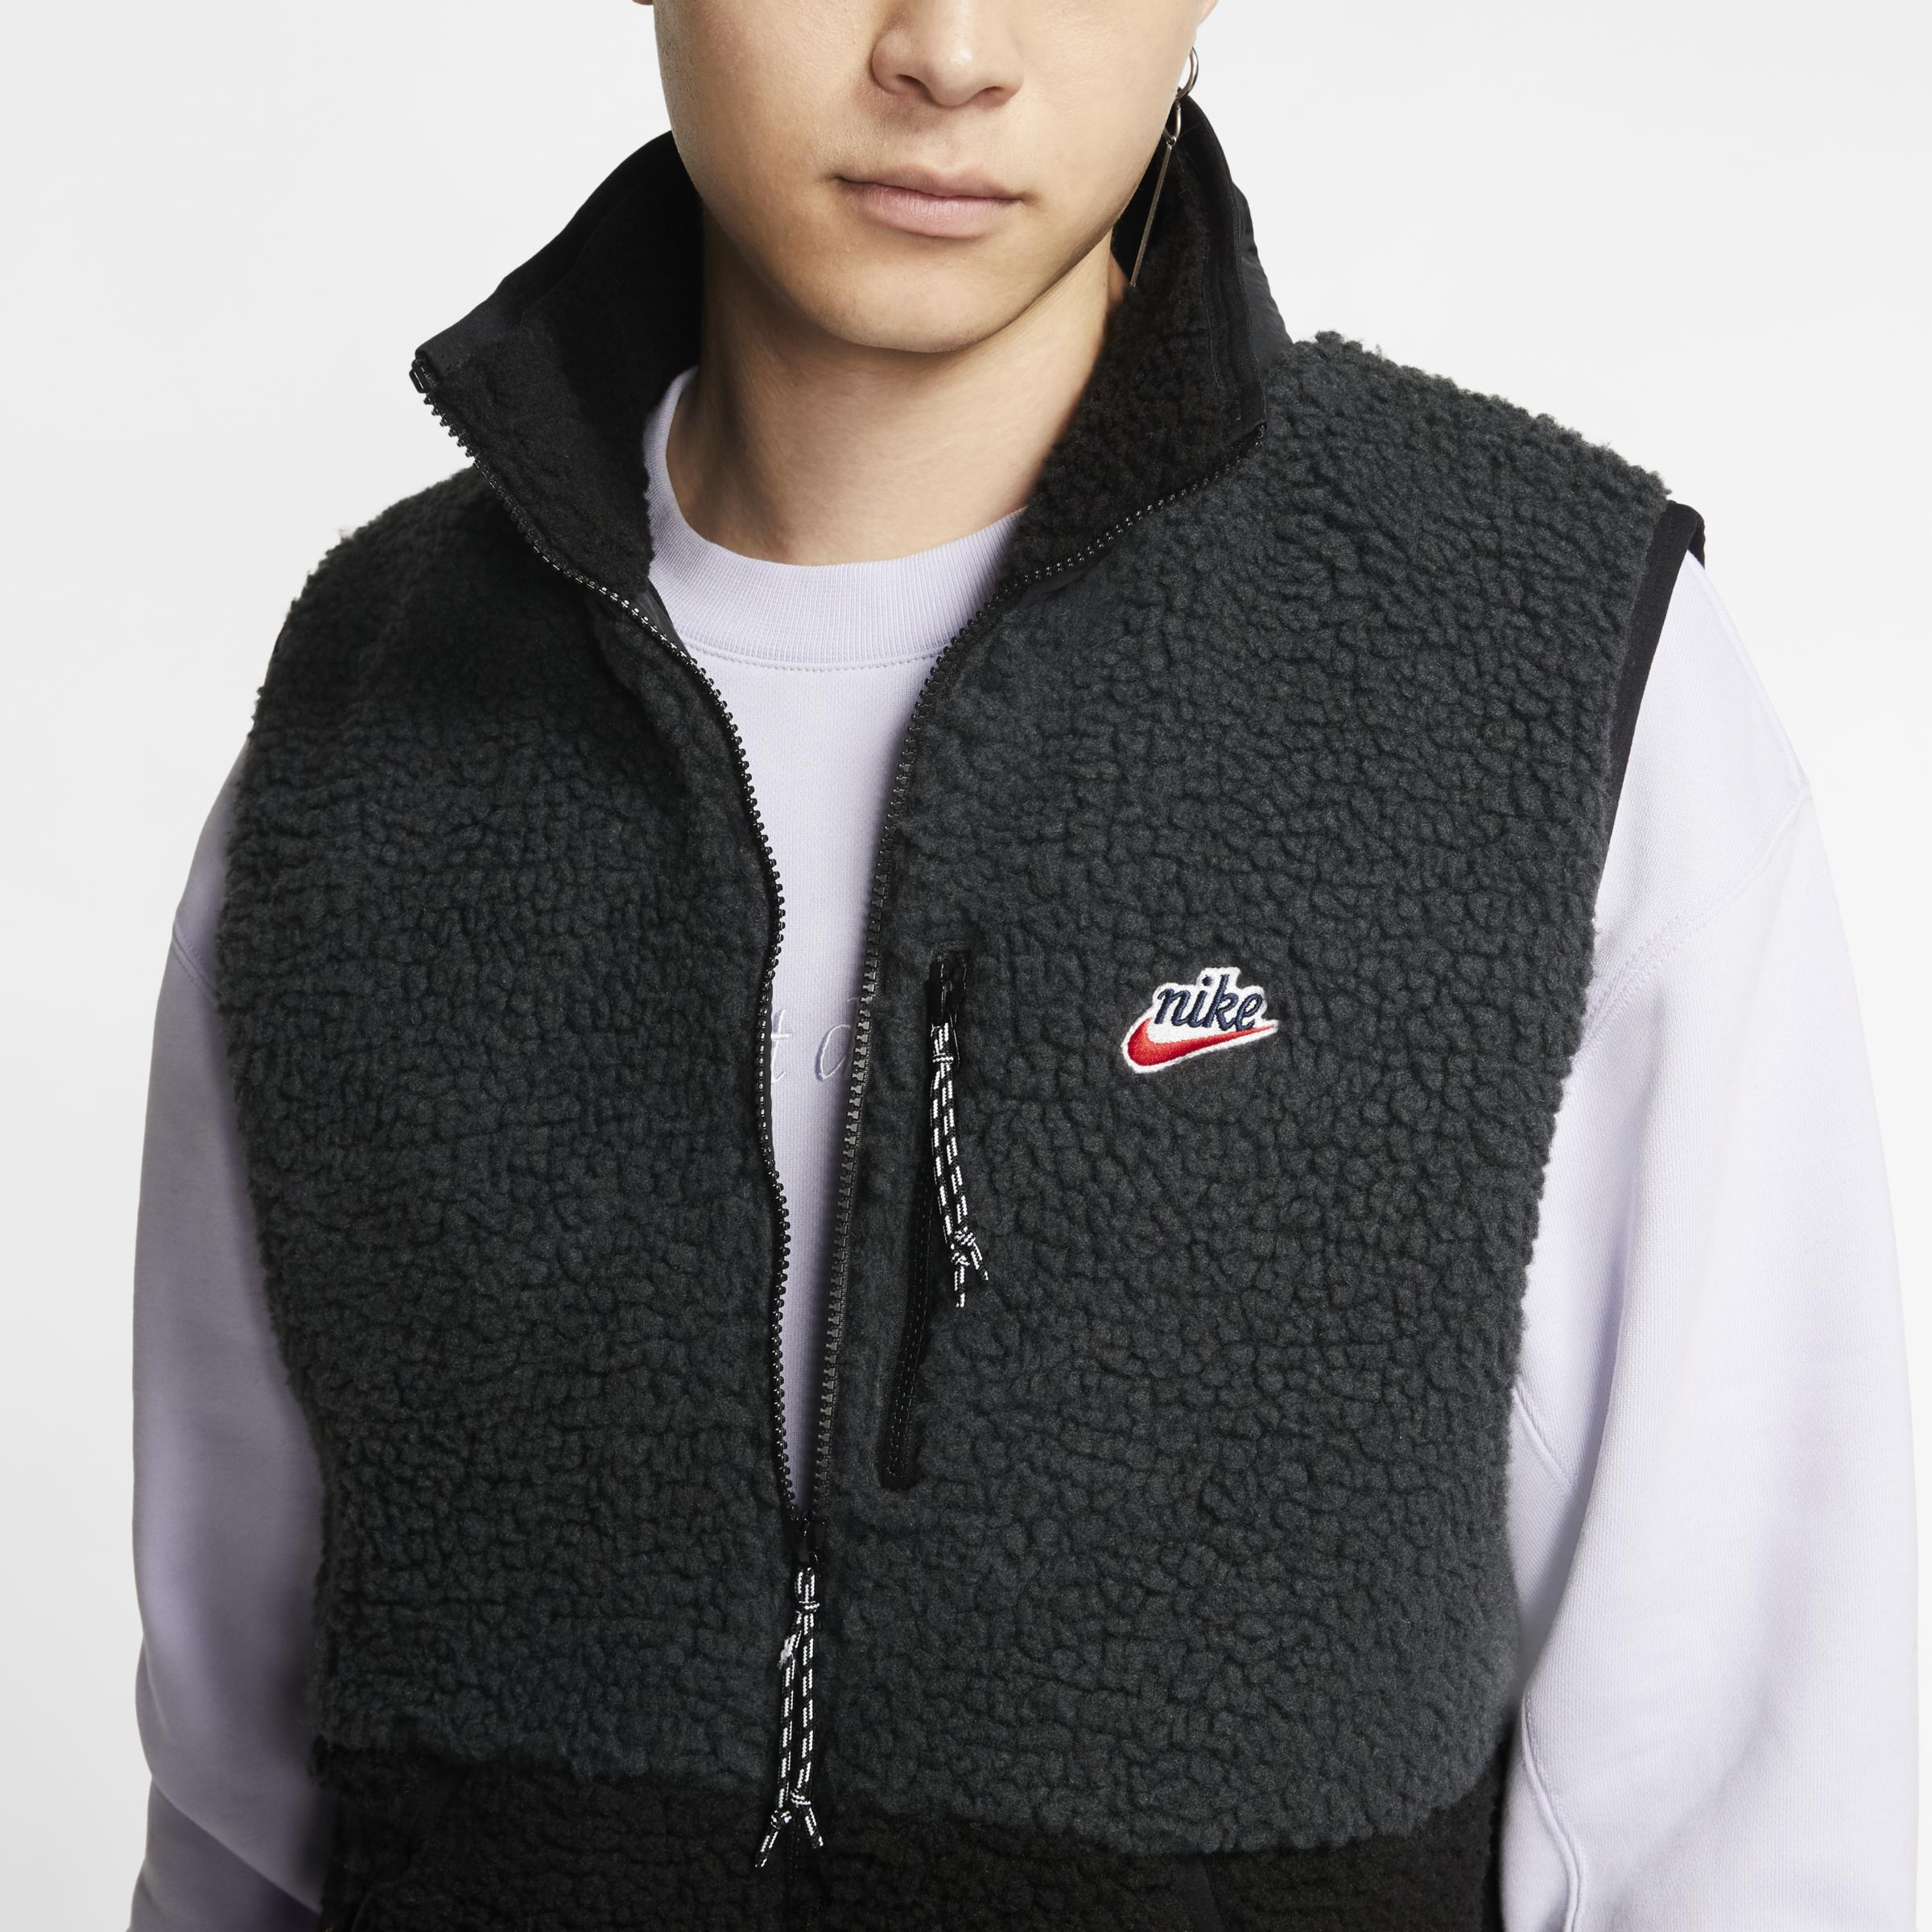 veste sherpa nike coupon code for 1596b 6dbe9